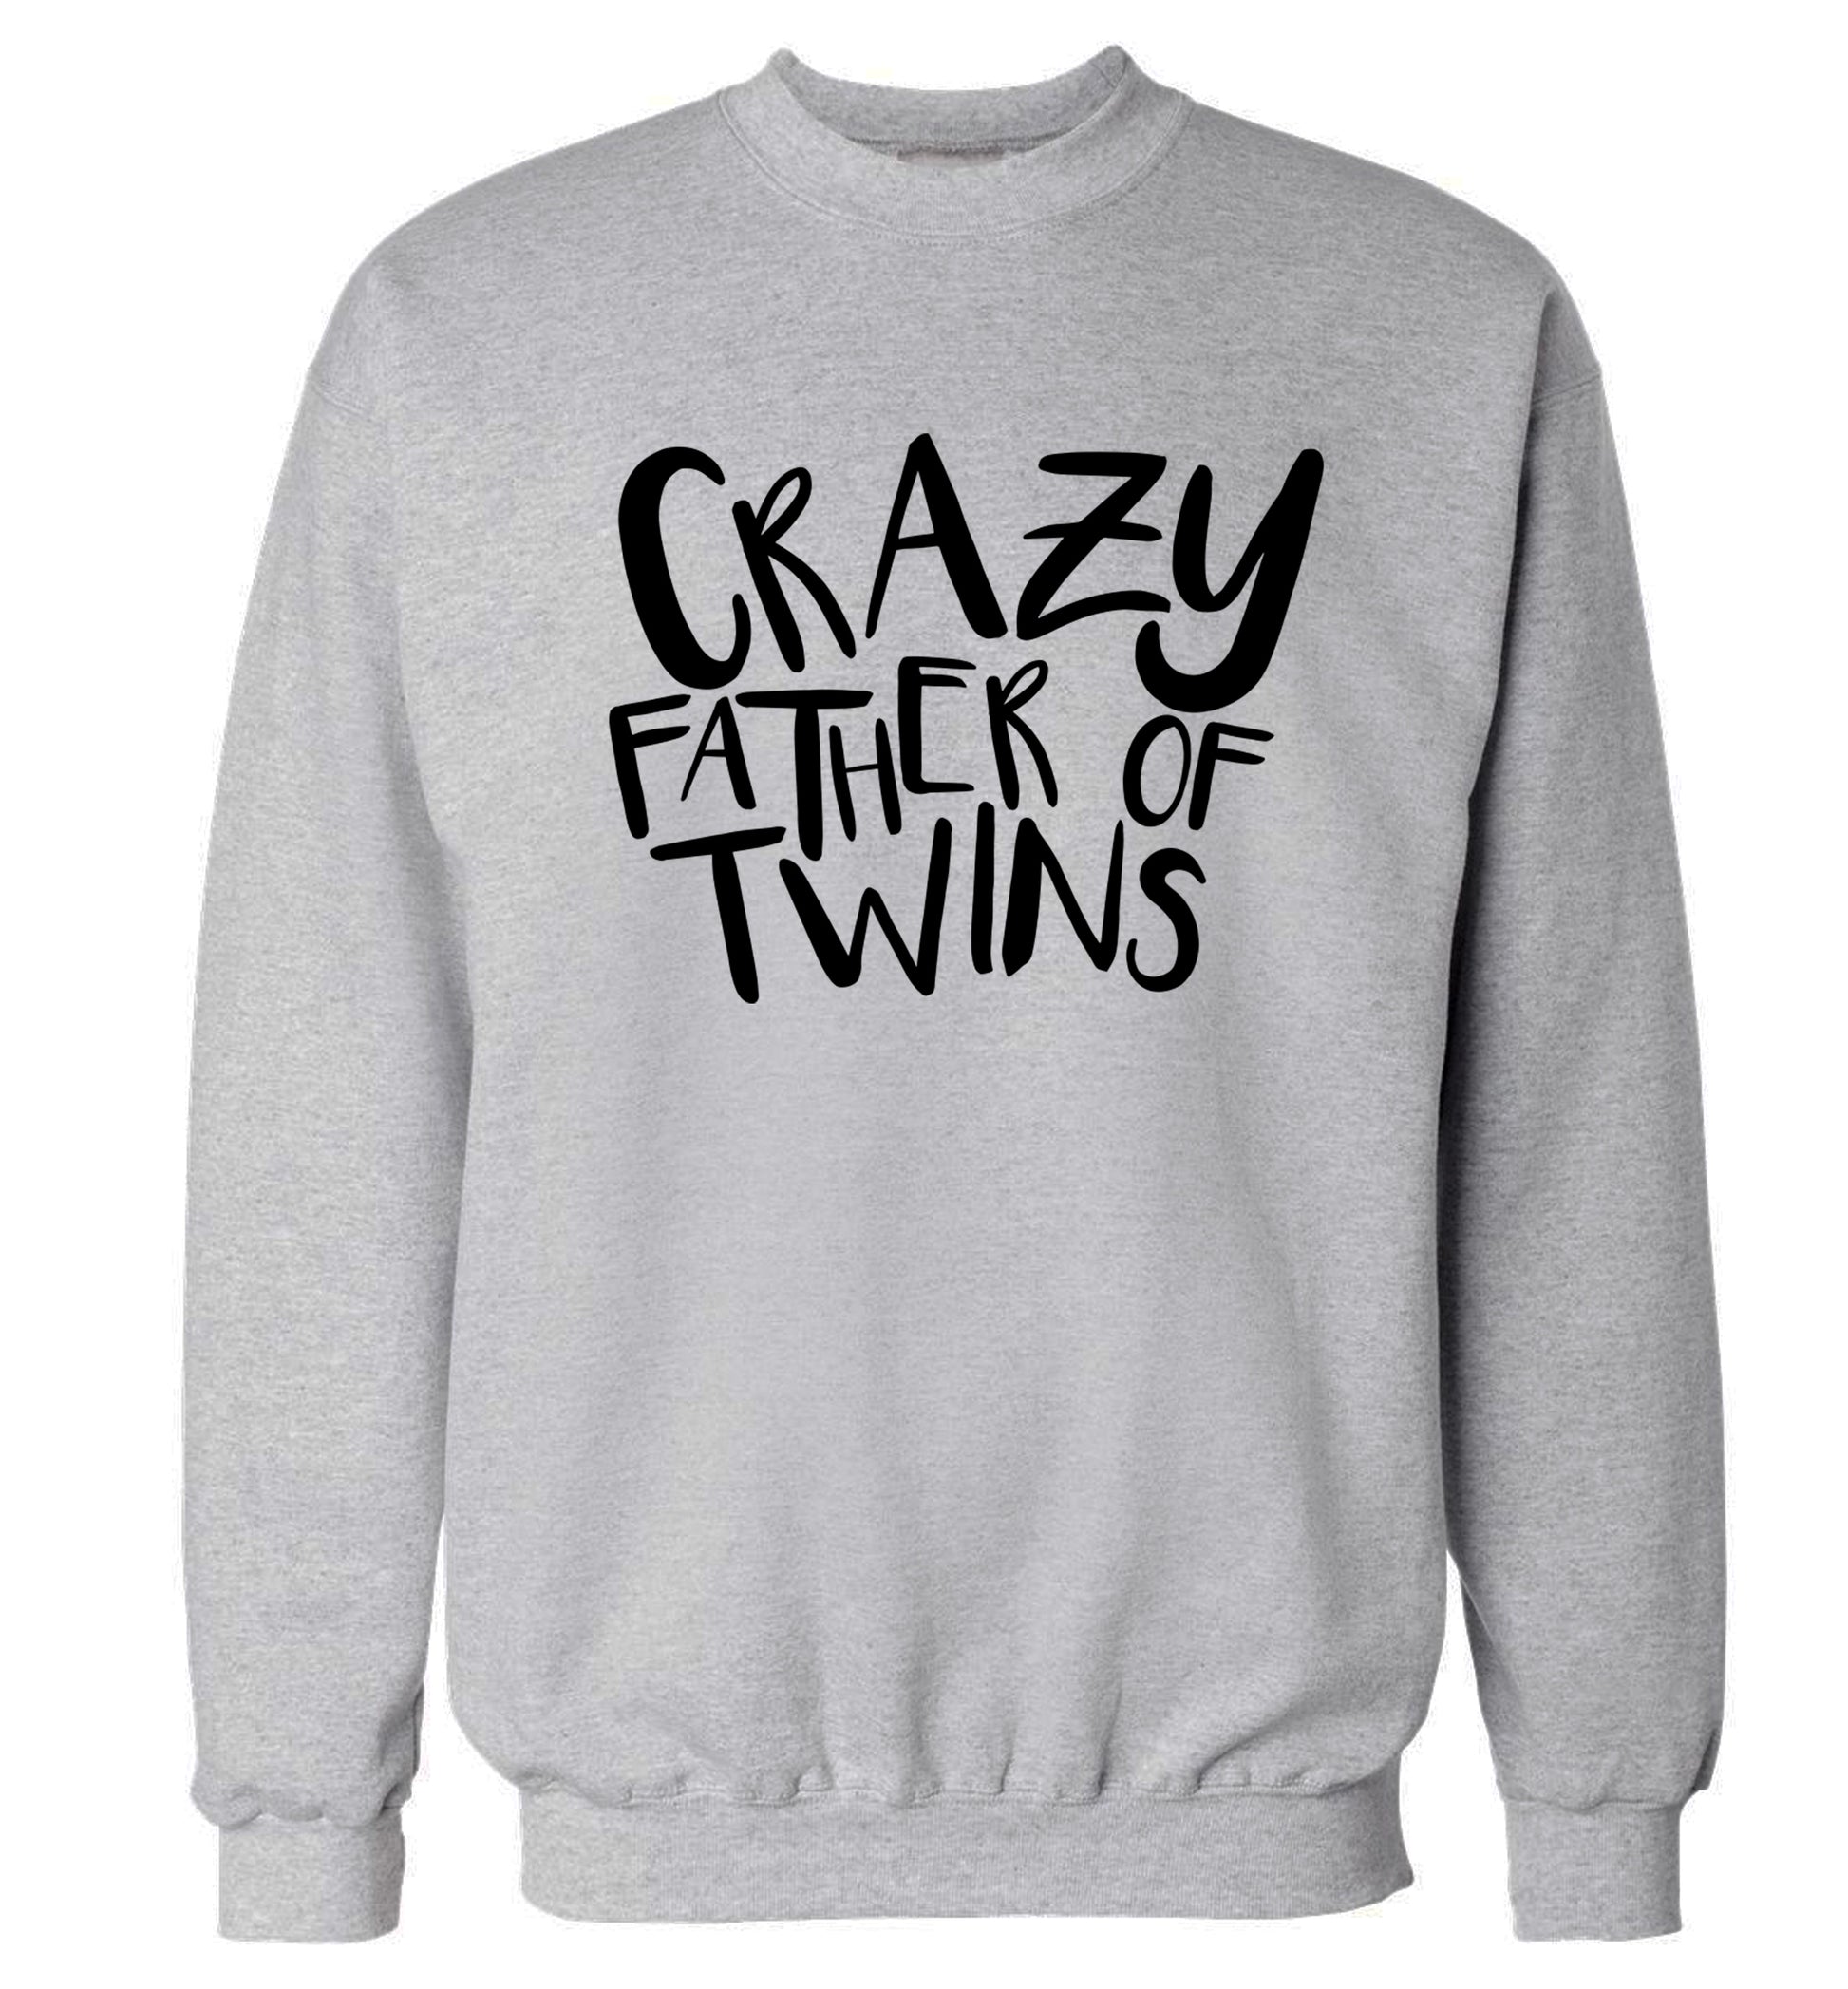 Crazy father of twins Adult's unisex grey Sweater 2XL